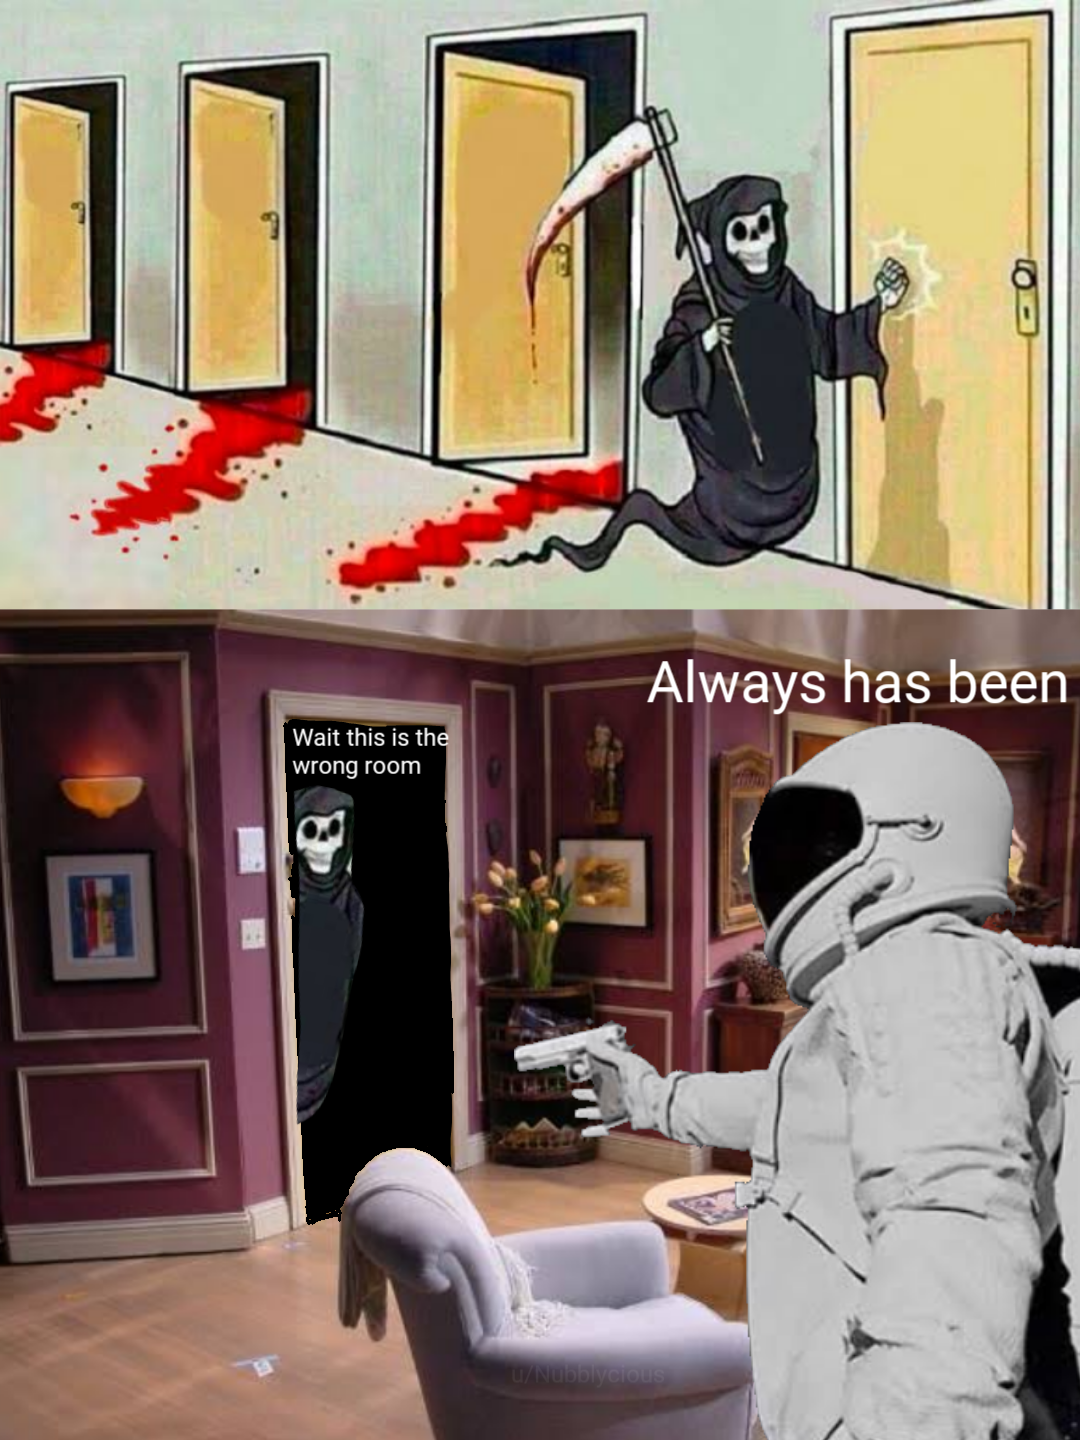 hugeplateofketchup8 -  memes that never die - Always has been Walt this is the wrong room